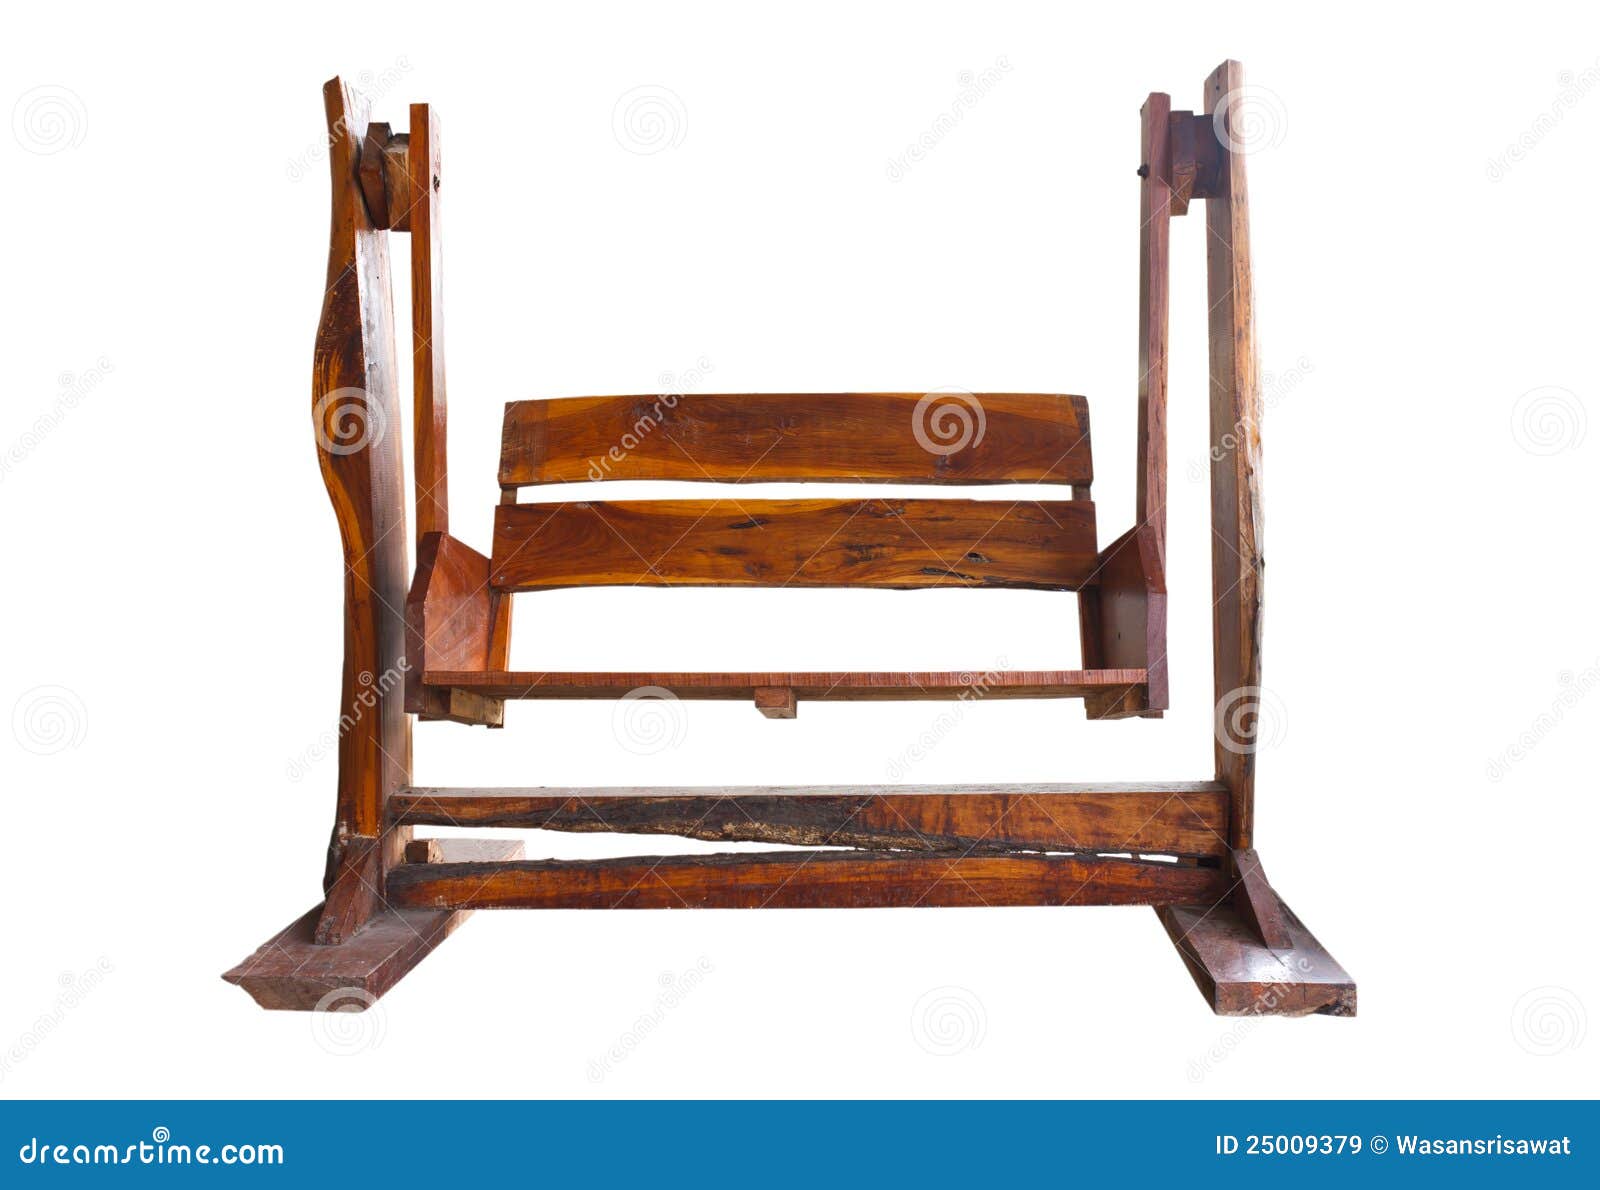 Wooden Garden Swing Seat Royalty Free Stock Images - Image: 25009379